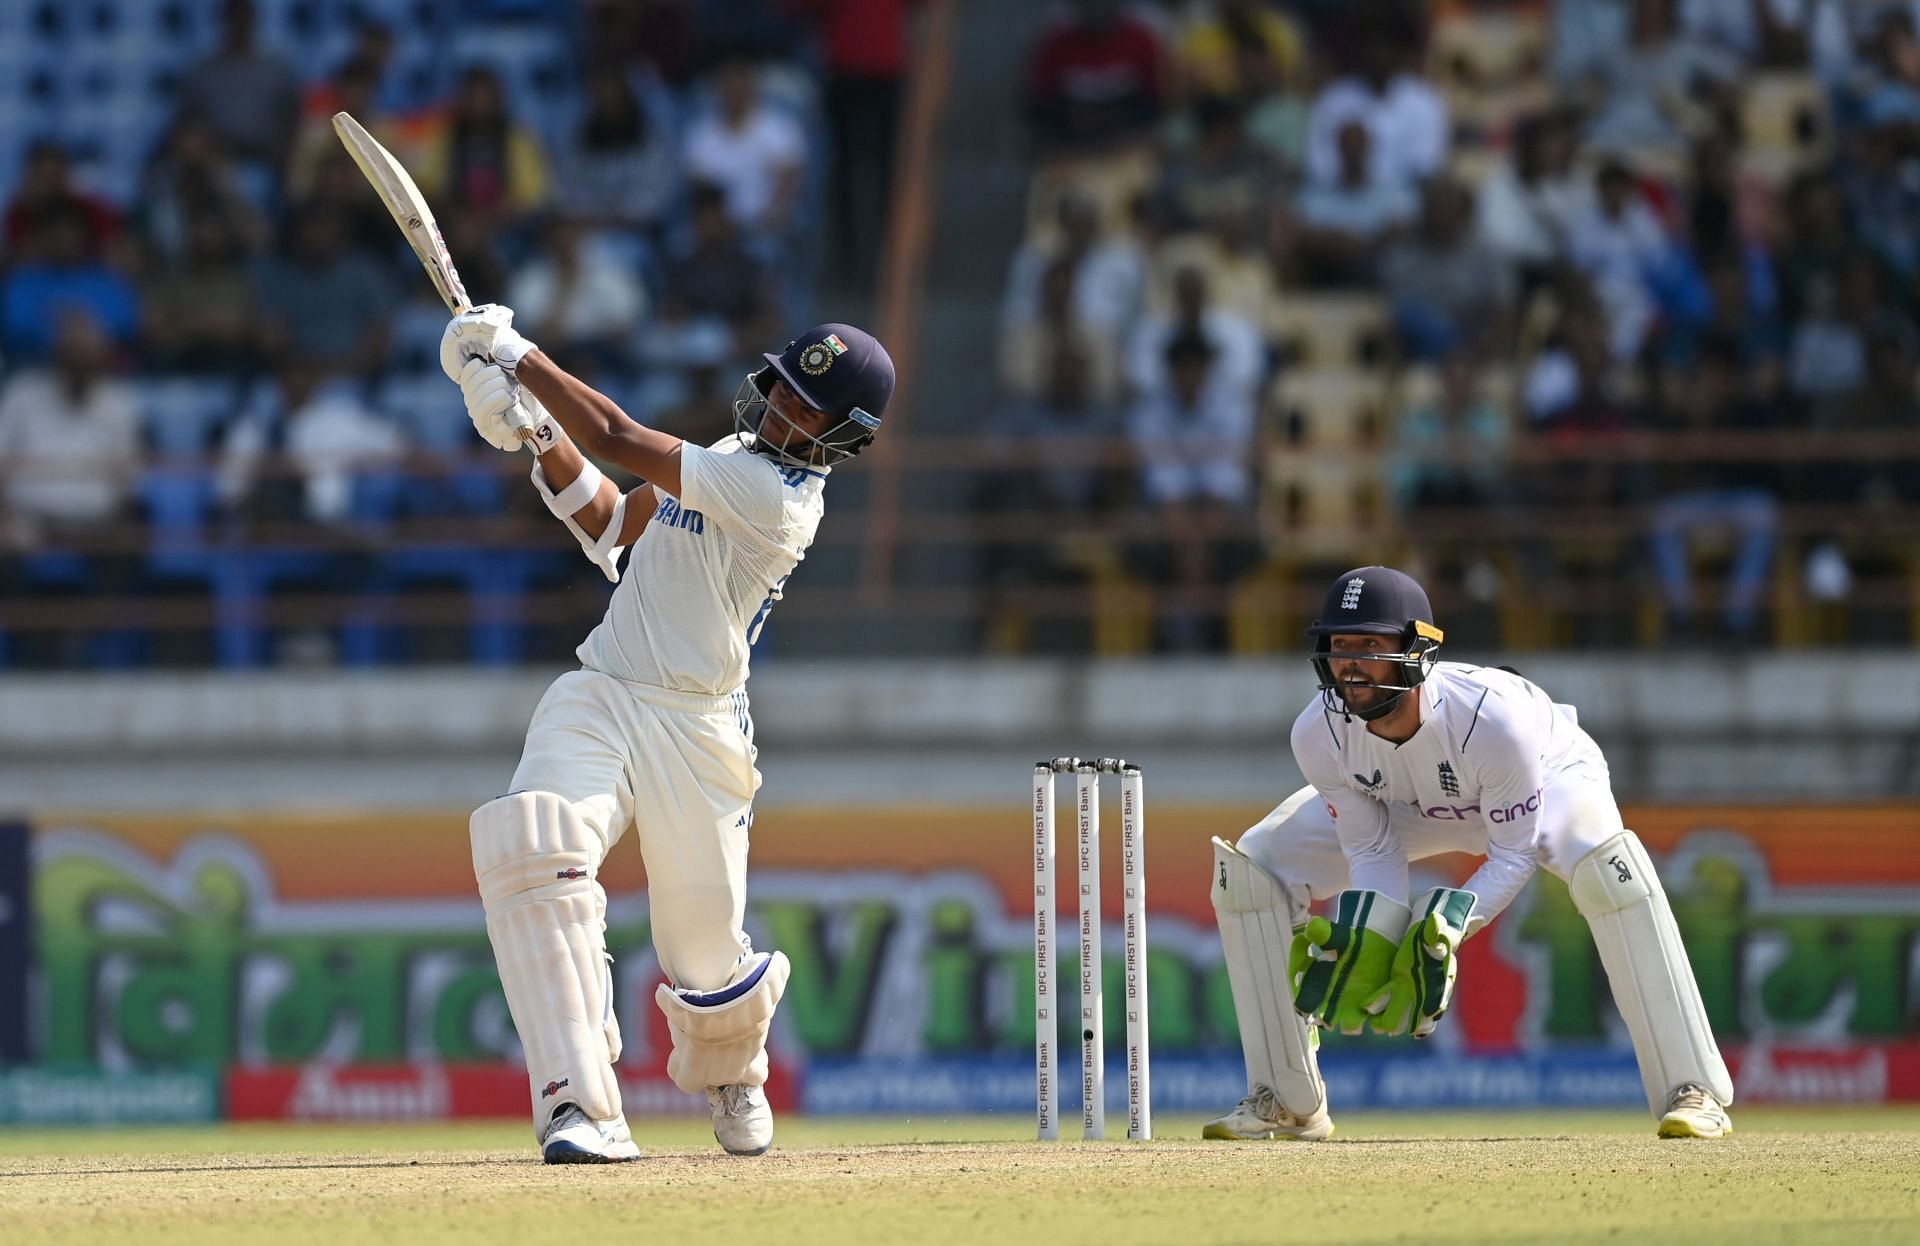 Yashasvi Jaiswal struck nine fours and five sixes during his innings. [P/C: Getty]